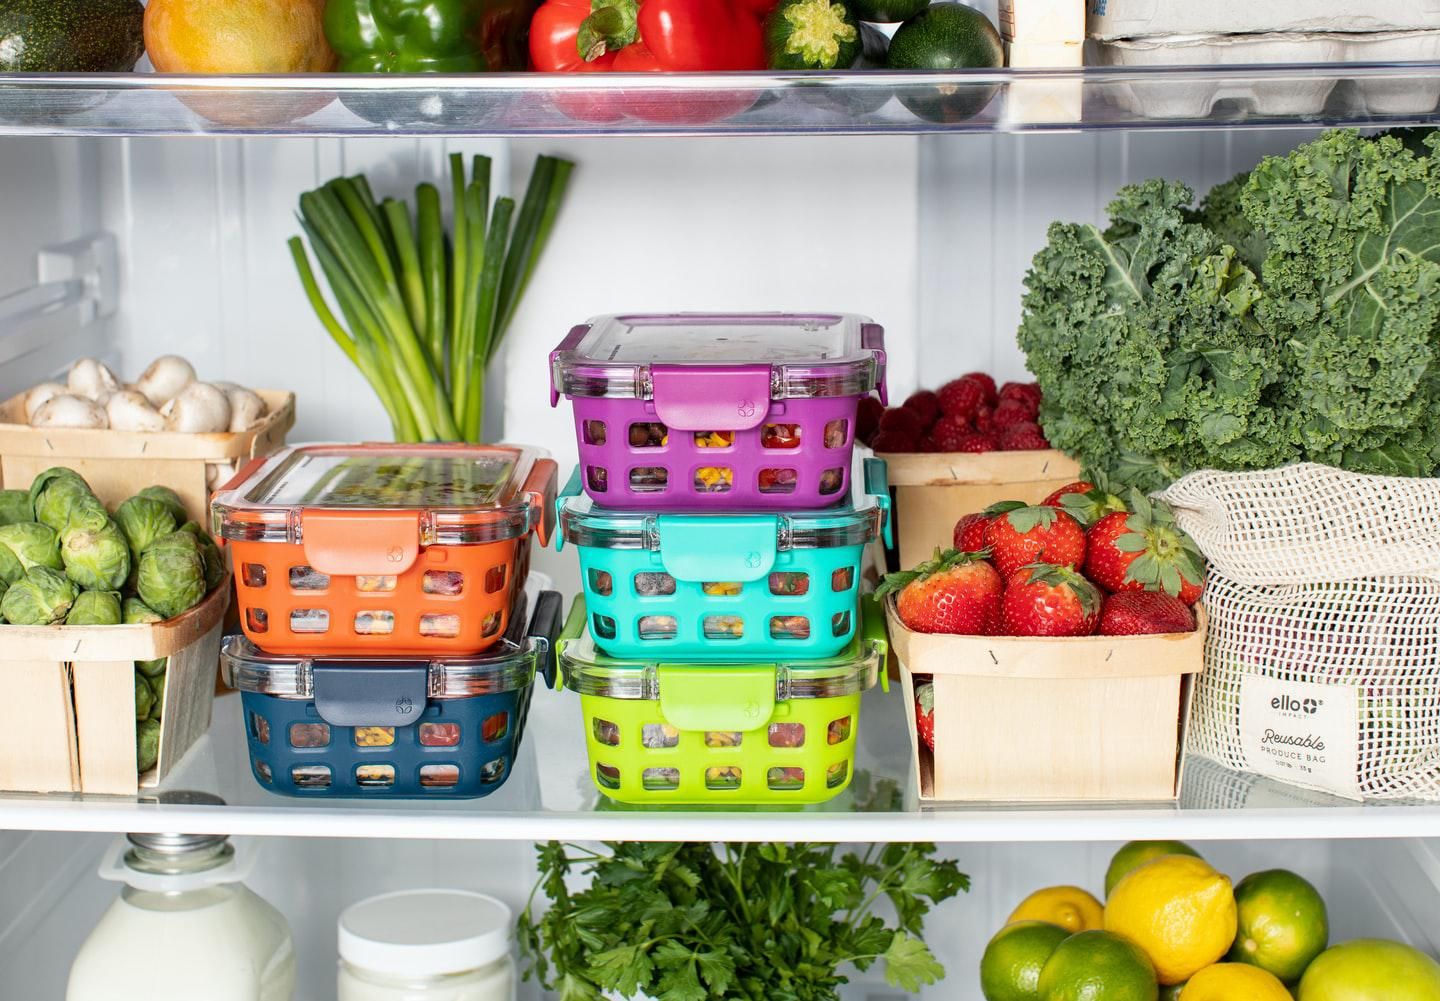 Spring Cleaning Checklist Should Include Your Fridge and Pantry, Too - Farm  and Dairy